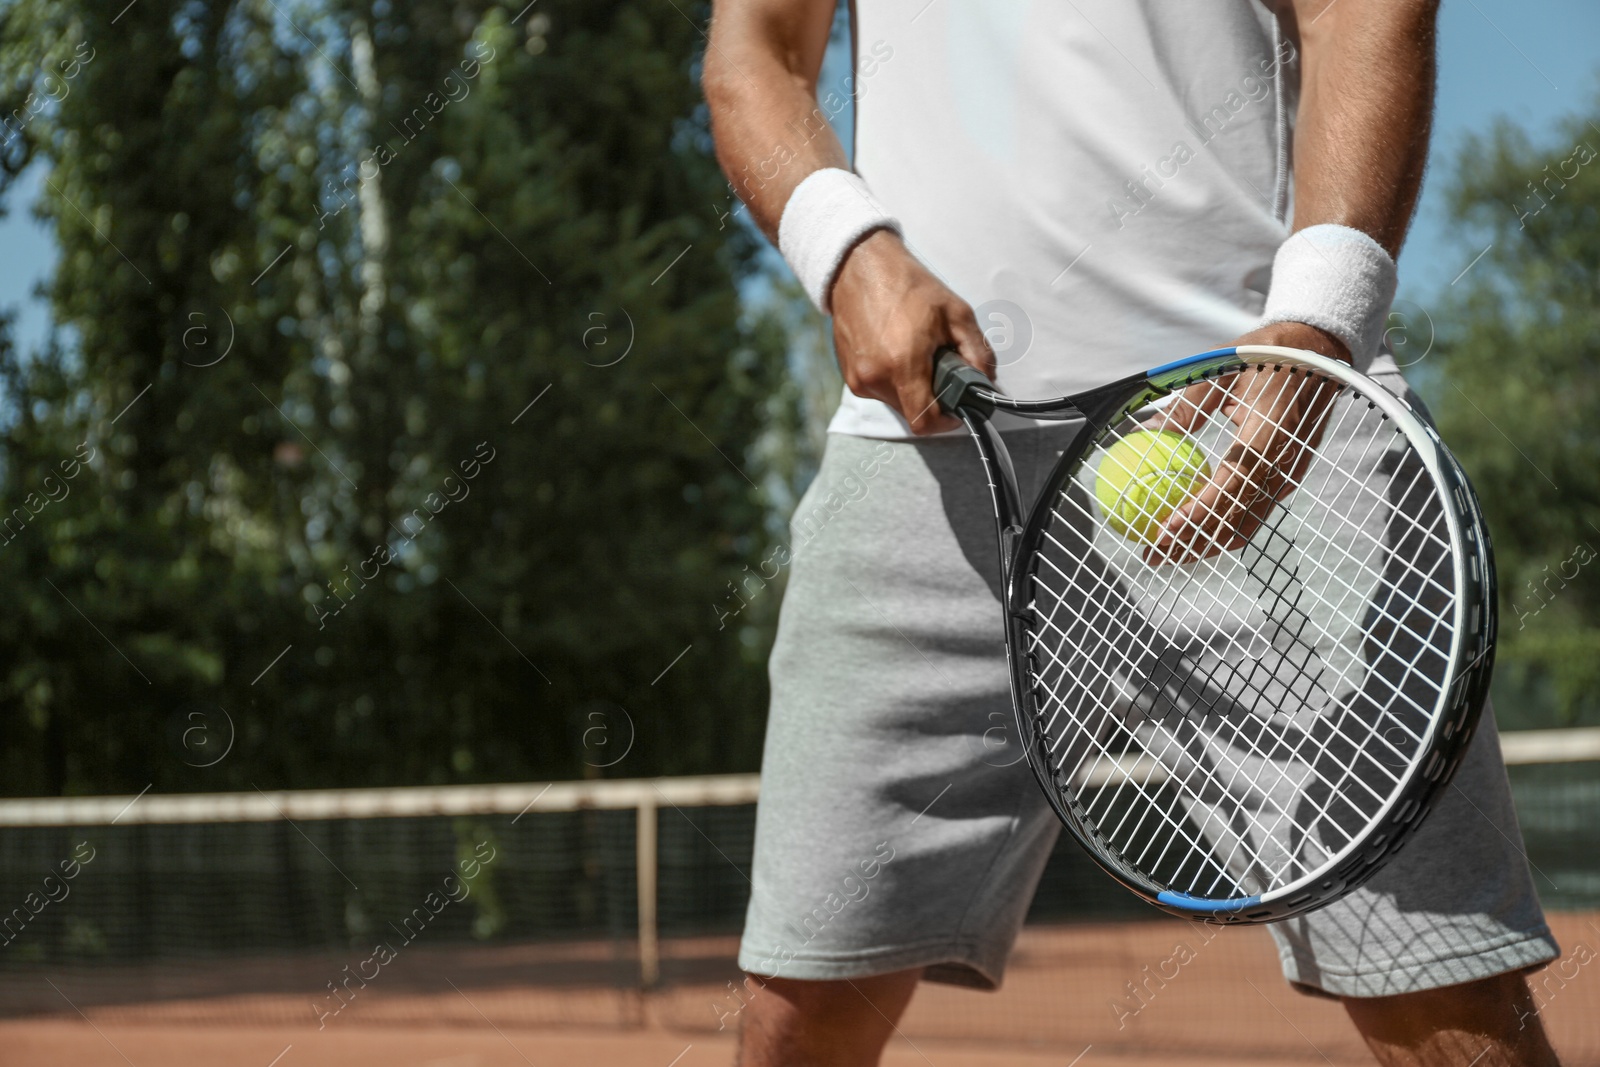 Photo of Sportsman playing tennis at court on sunny day, closeup